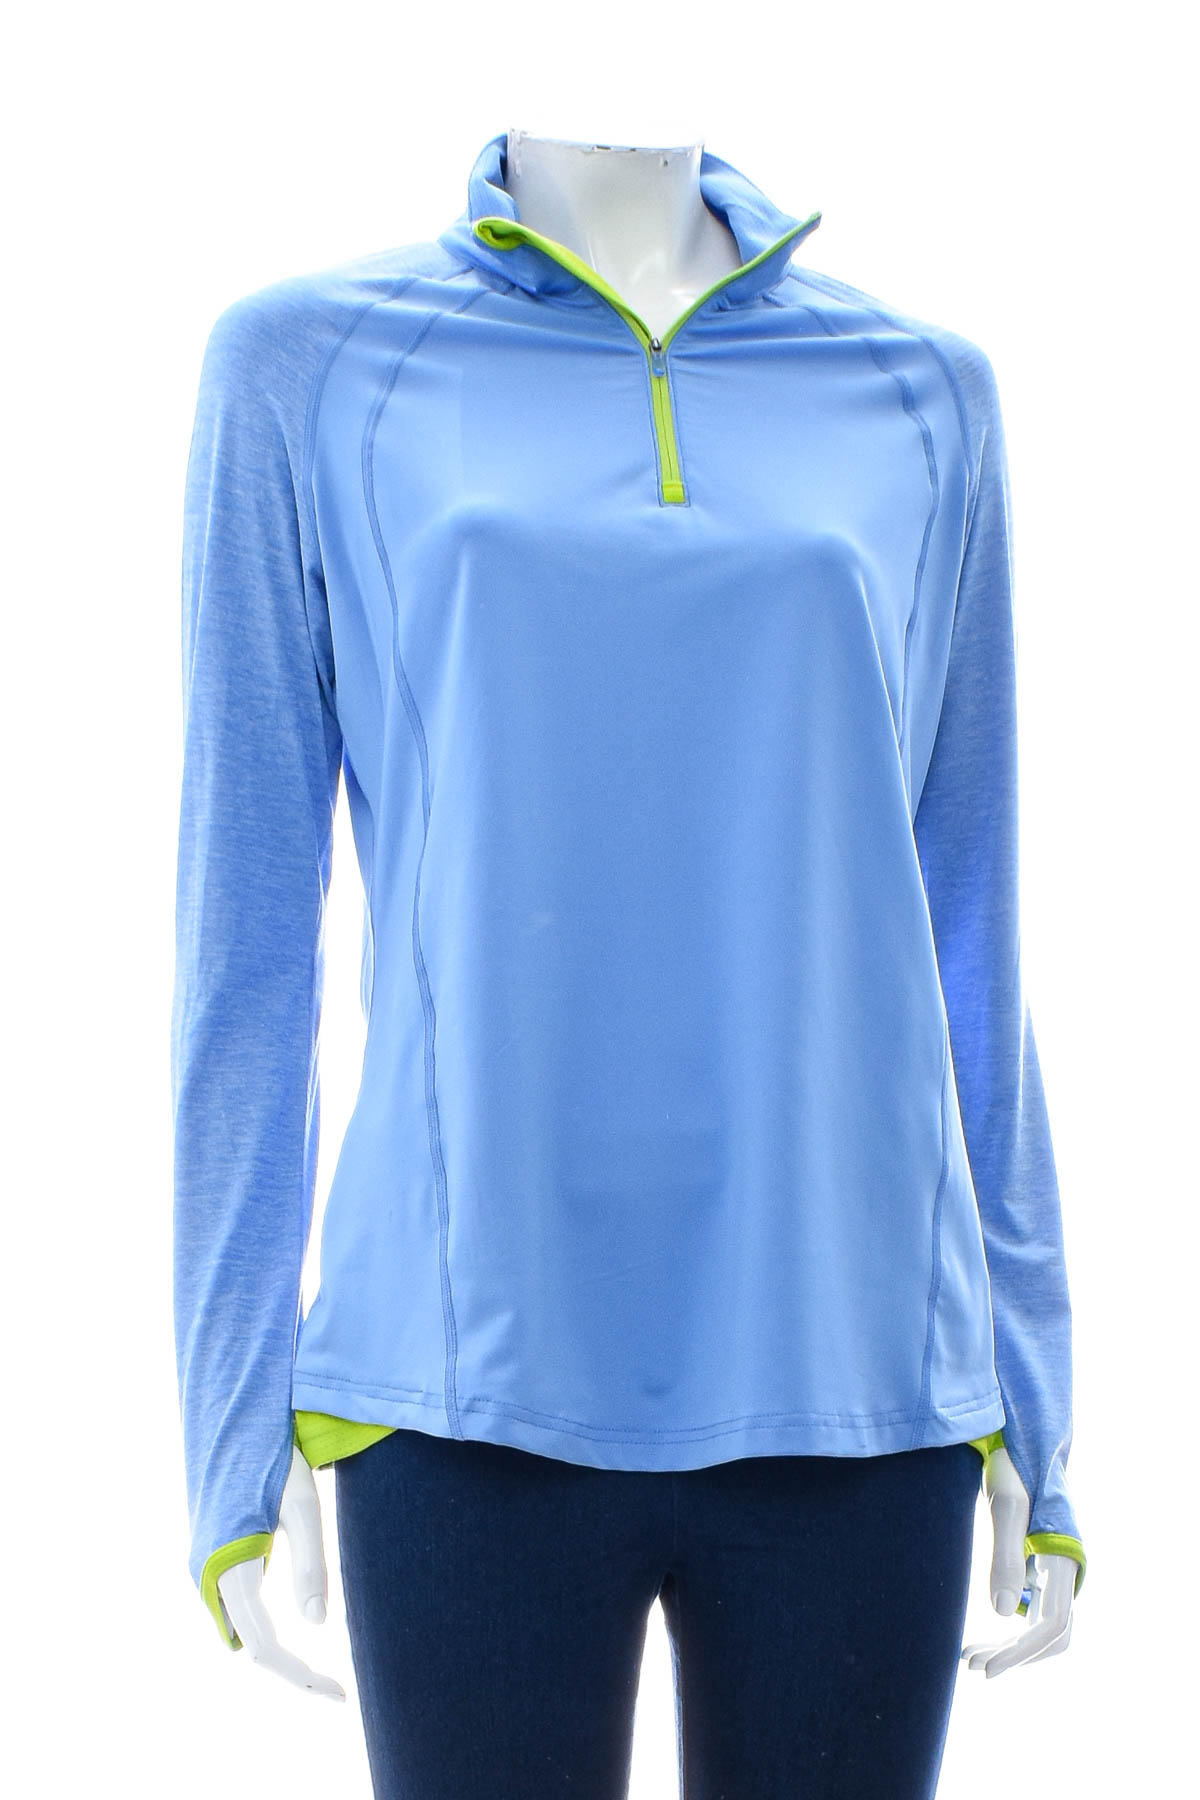 Women's sport blouse - Active LIMITED by Tchibo - 0